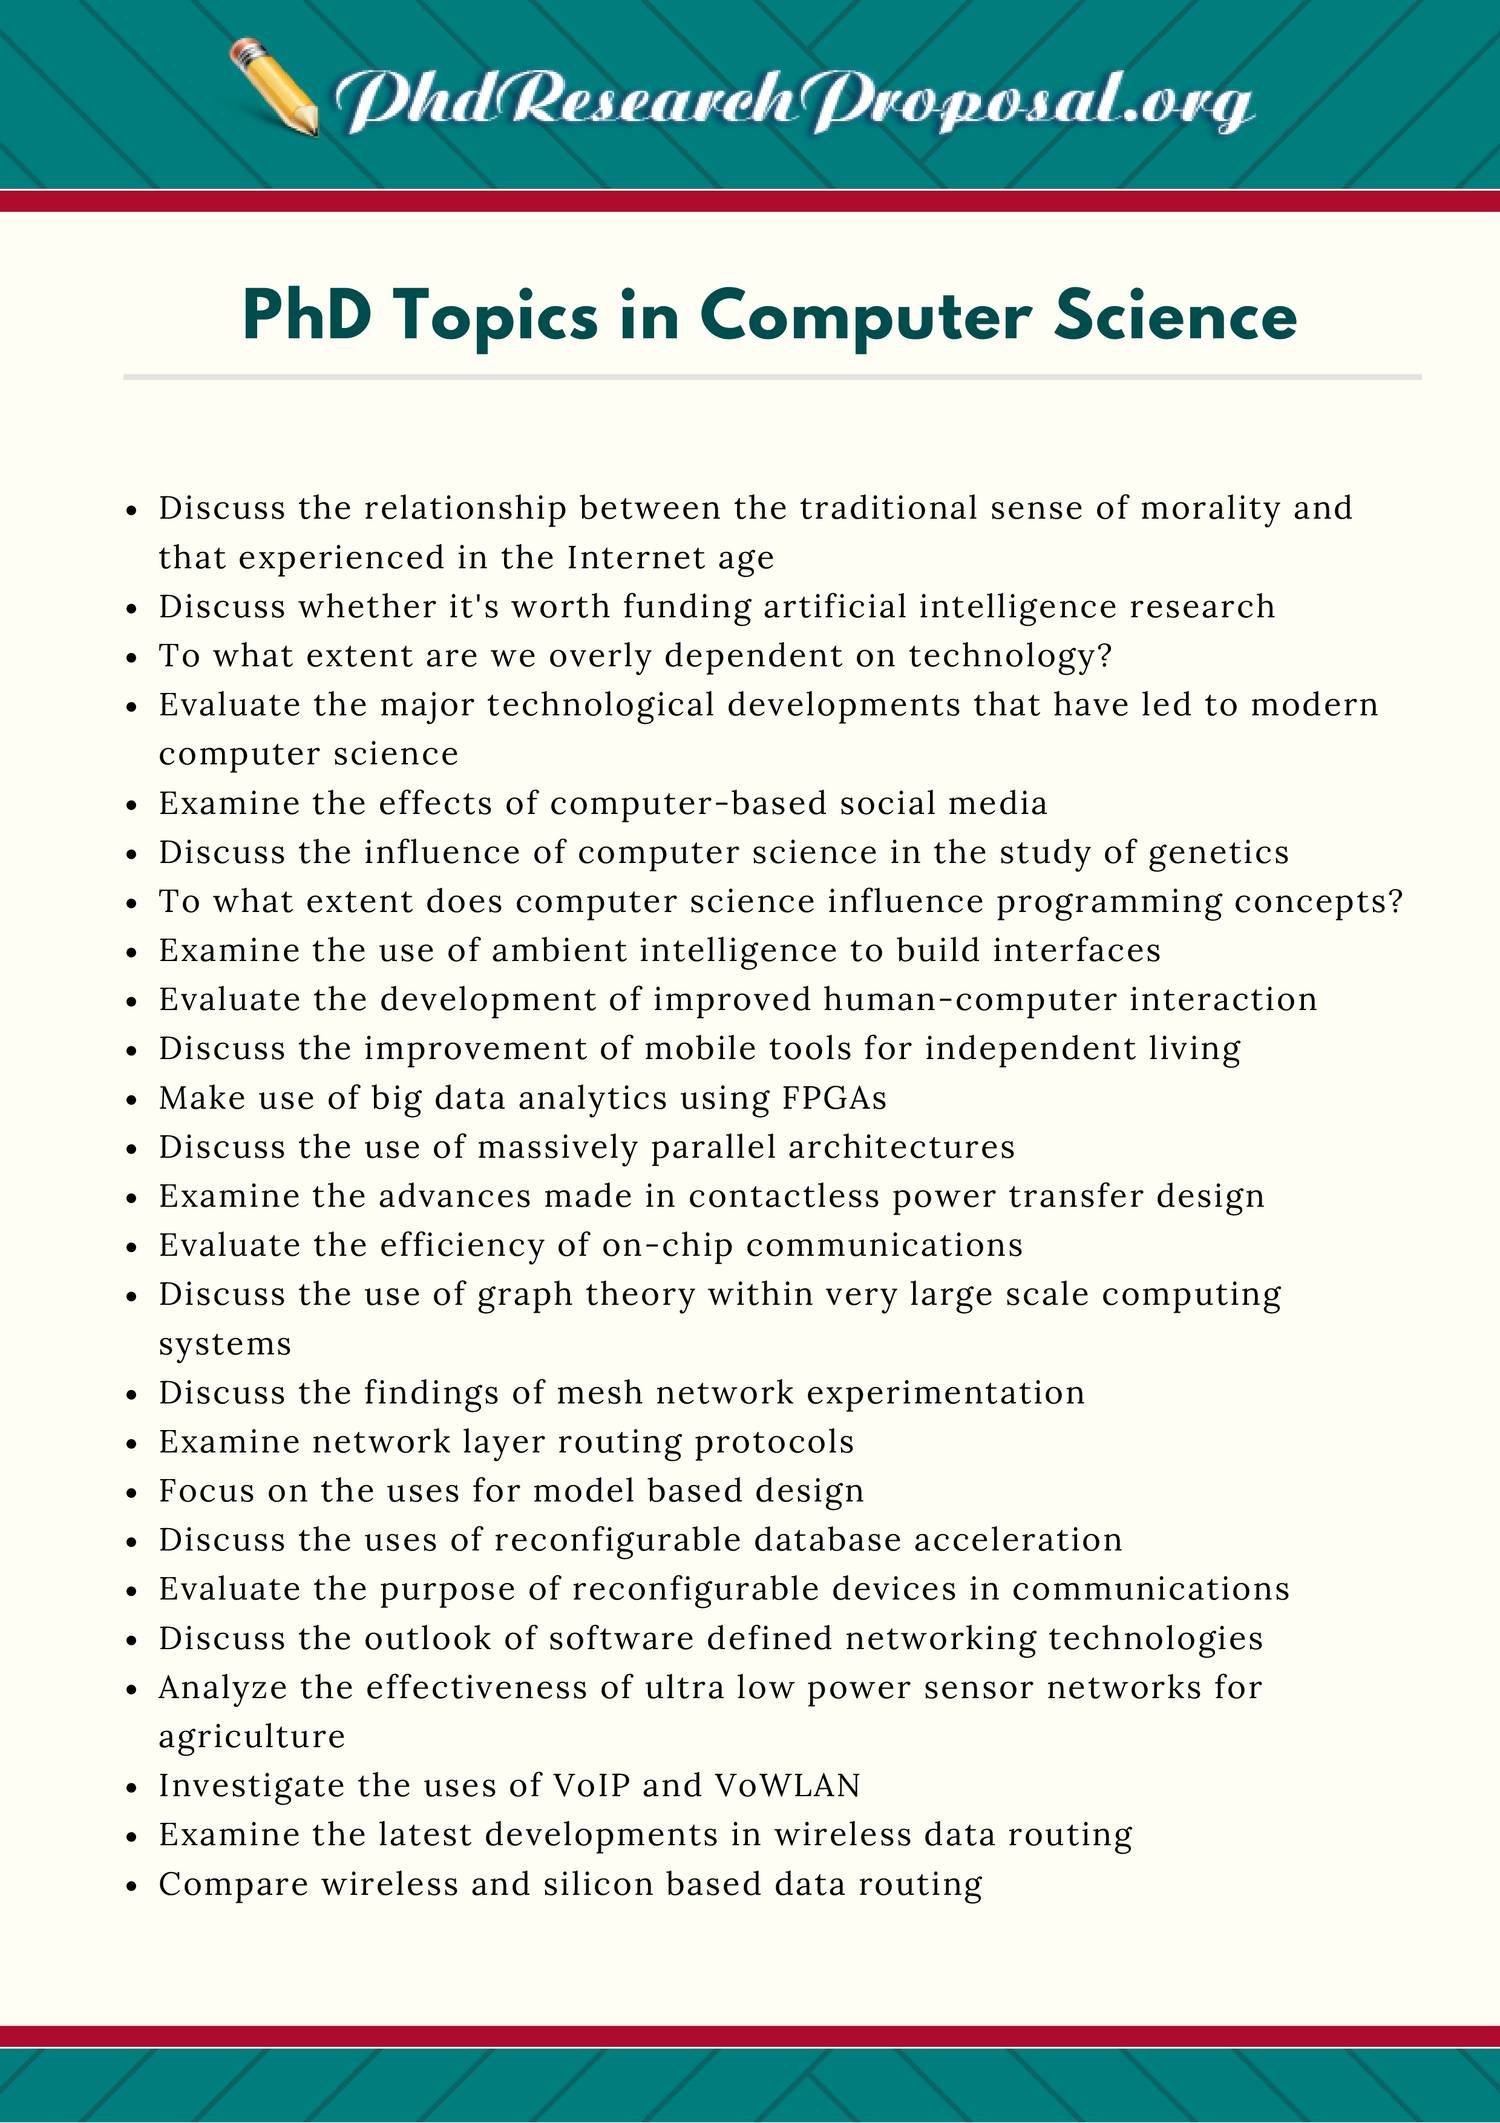 research paper seminar topics for computer science